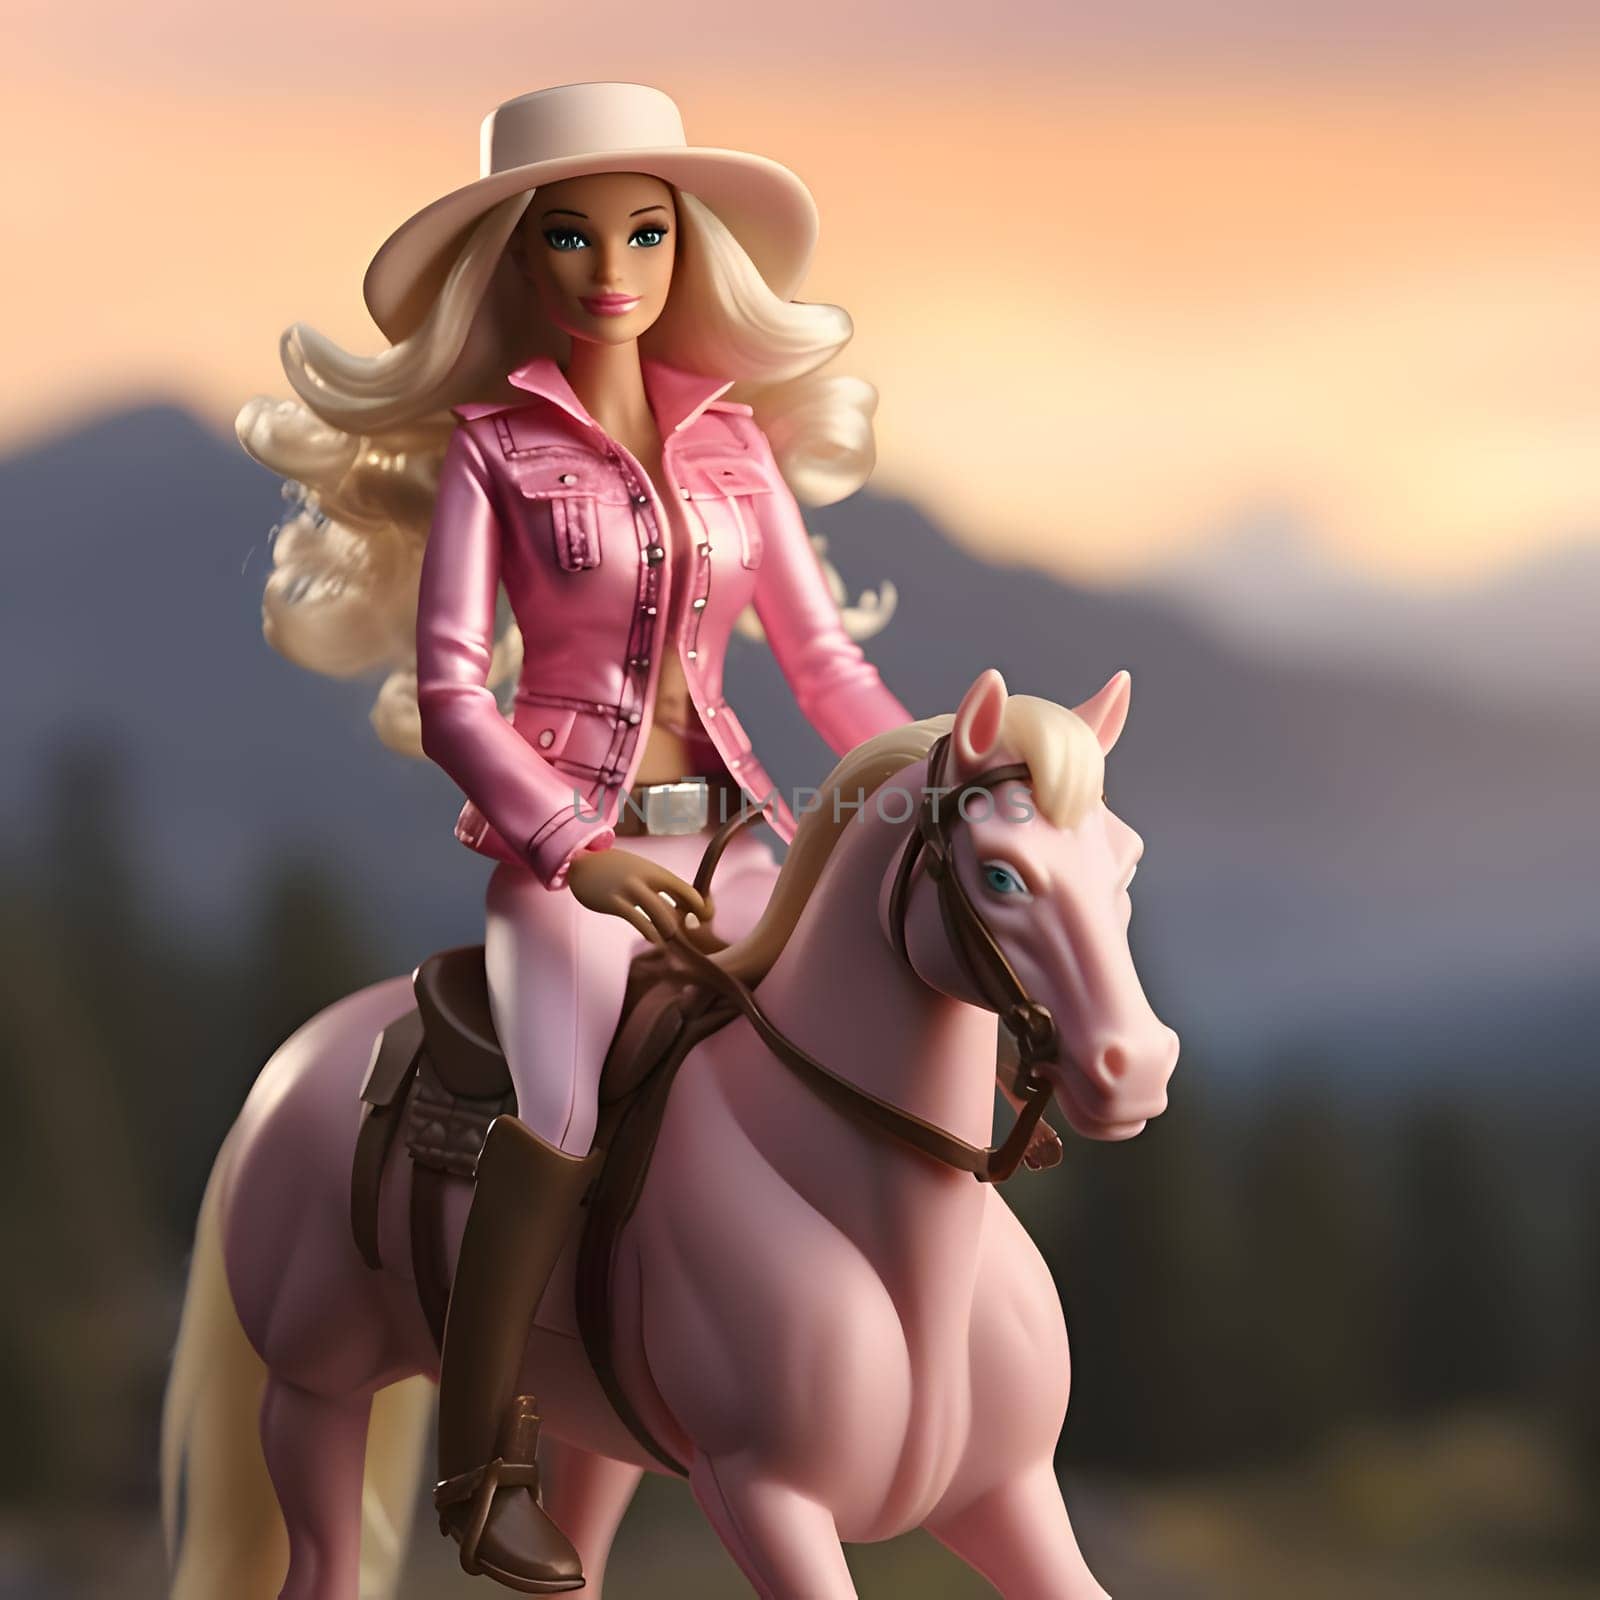 Cute blonde Barbie, dressed in a pink outfit and a white hat, gracefully sits on a majestic white horse, surrounded by the beauty of the mountains.